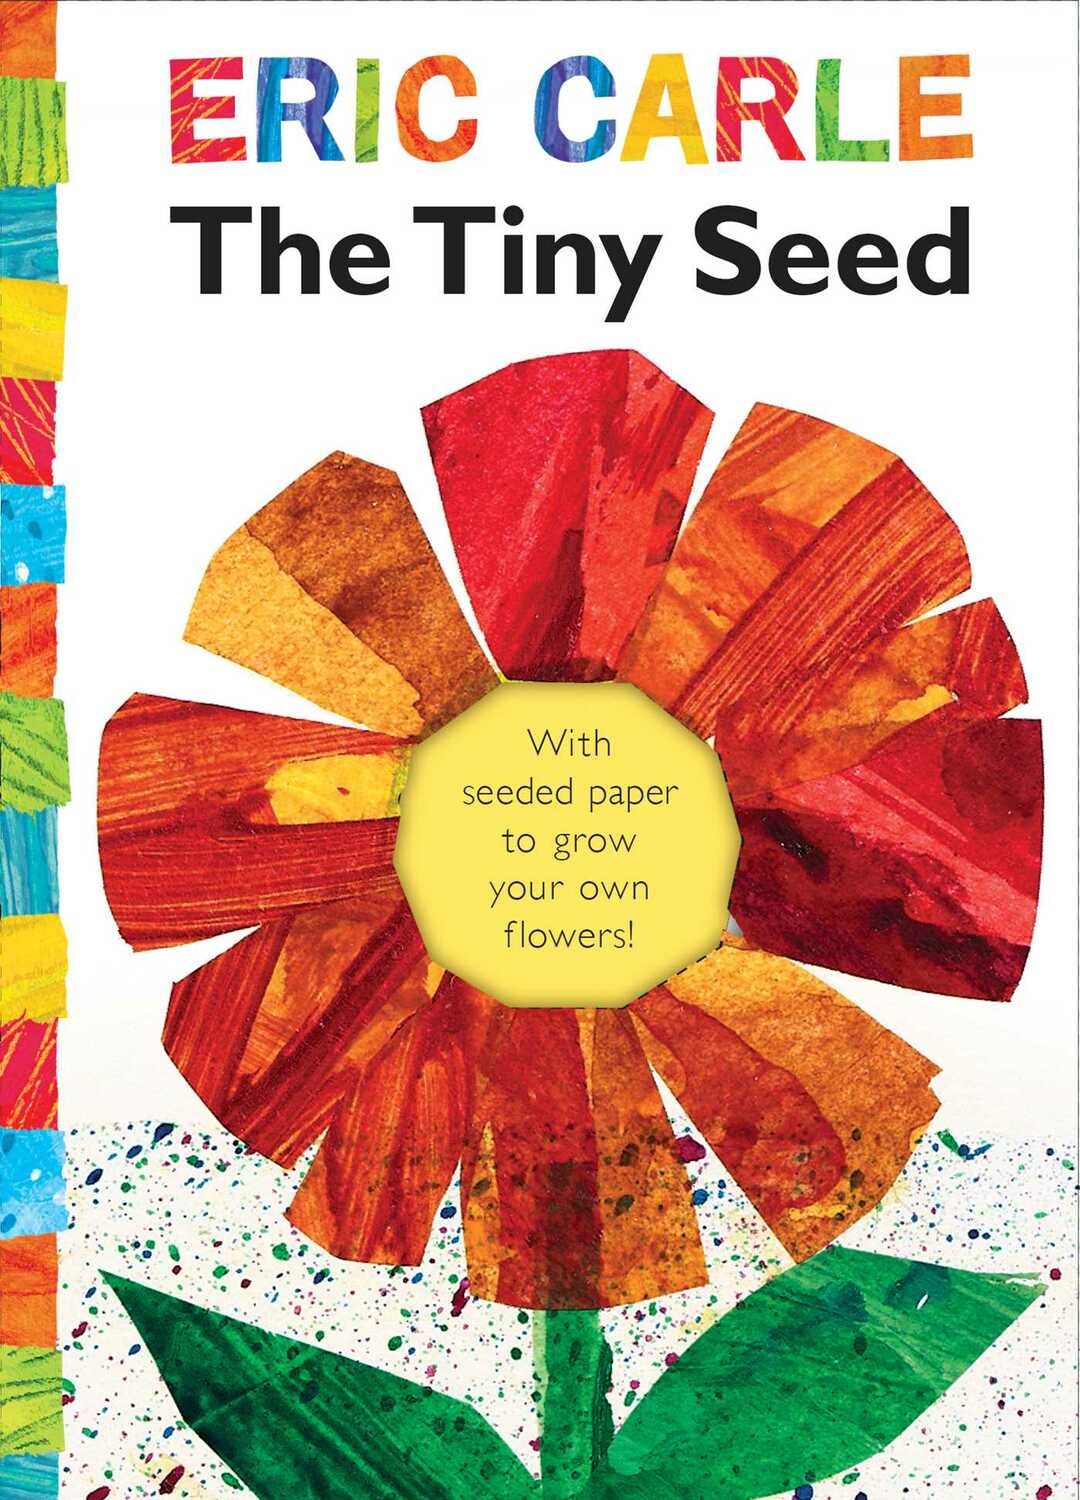 The Tiny Seed: With seeded paper to grow your own flowers!